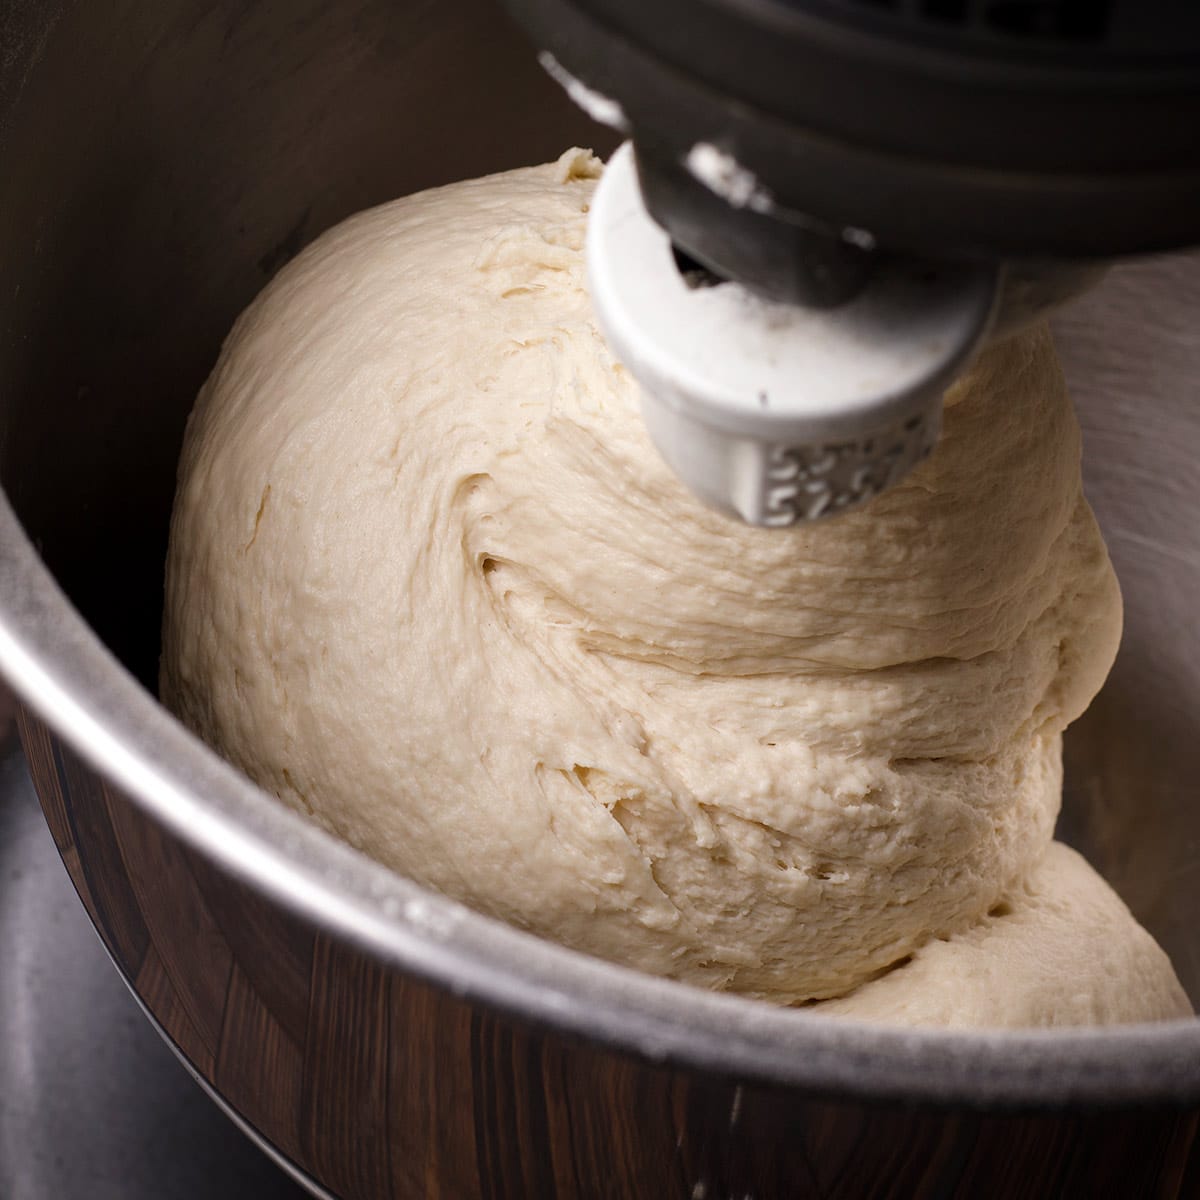 A KitchenAid stand mixer fitted with the dough hook, kneading pizza dough.